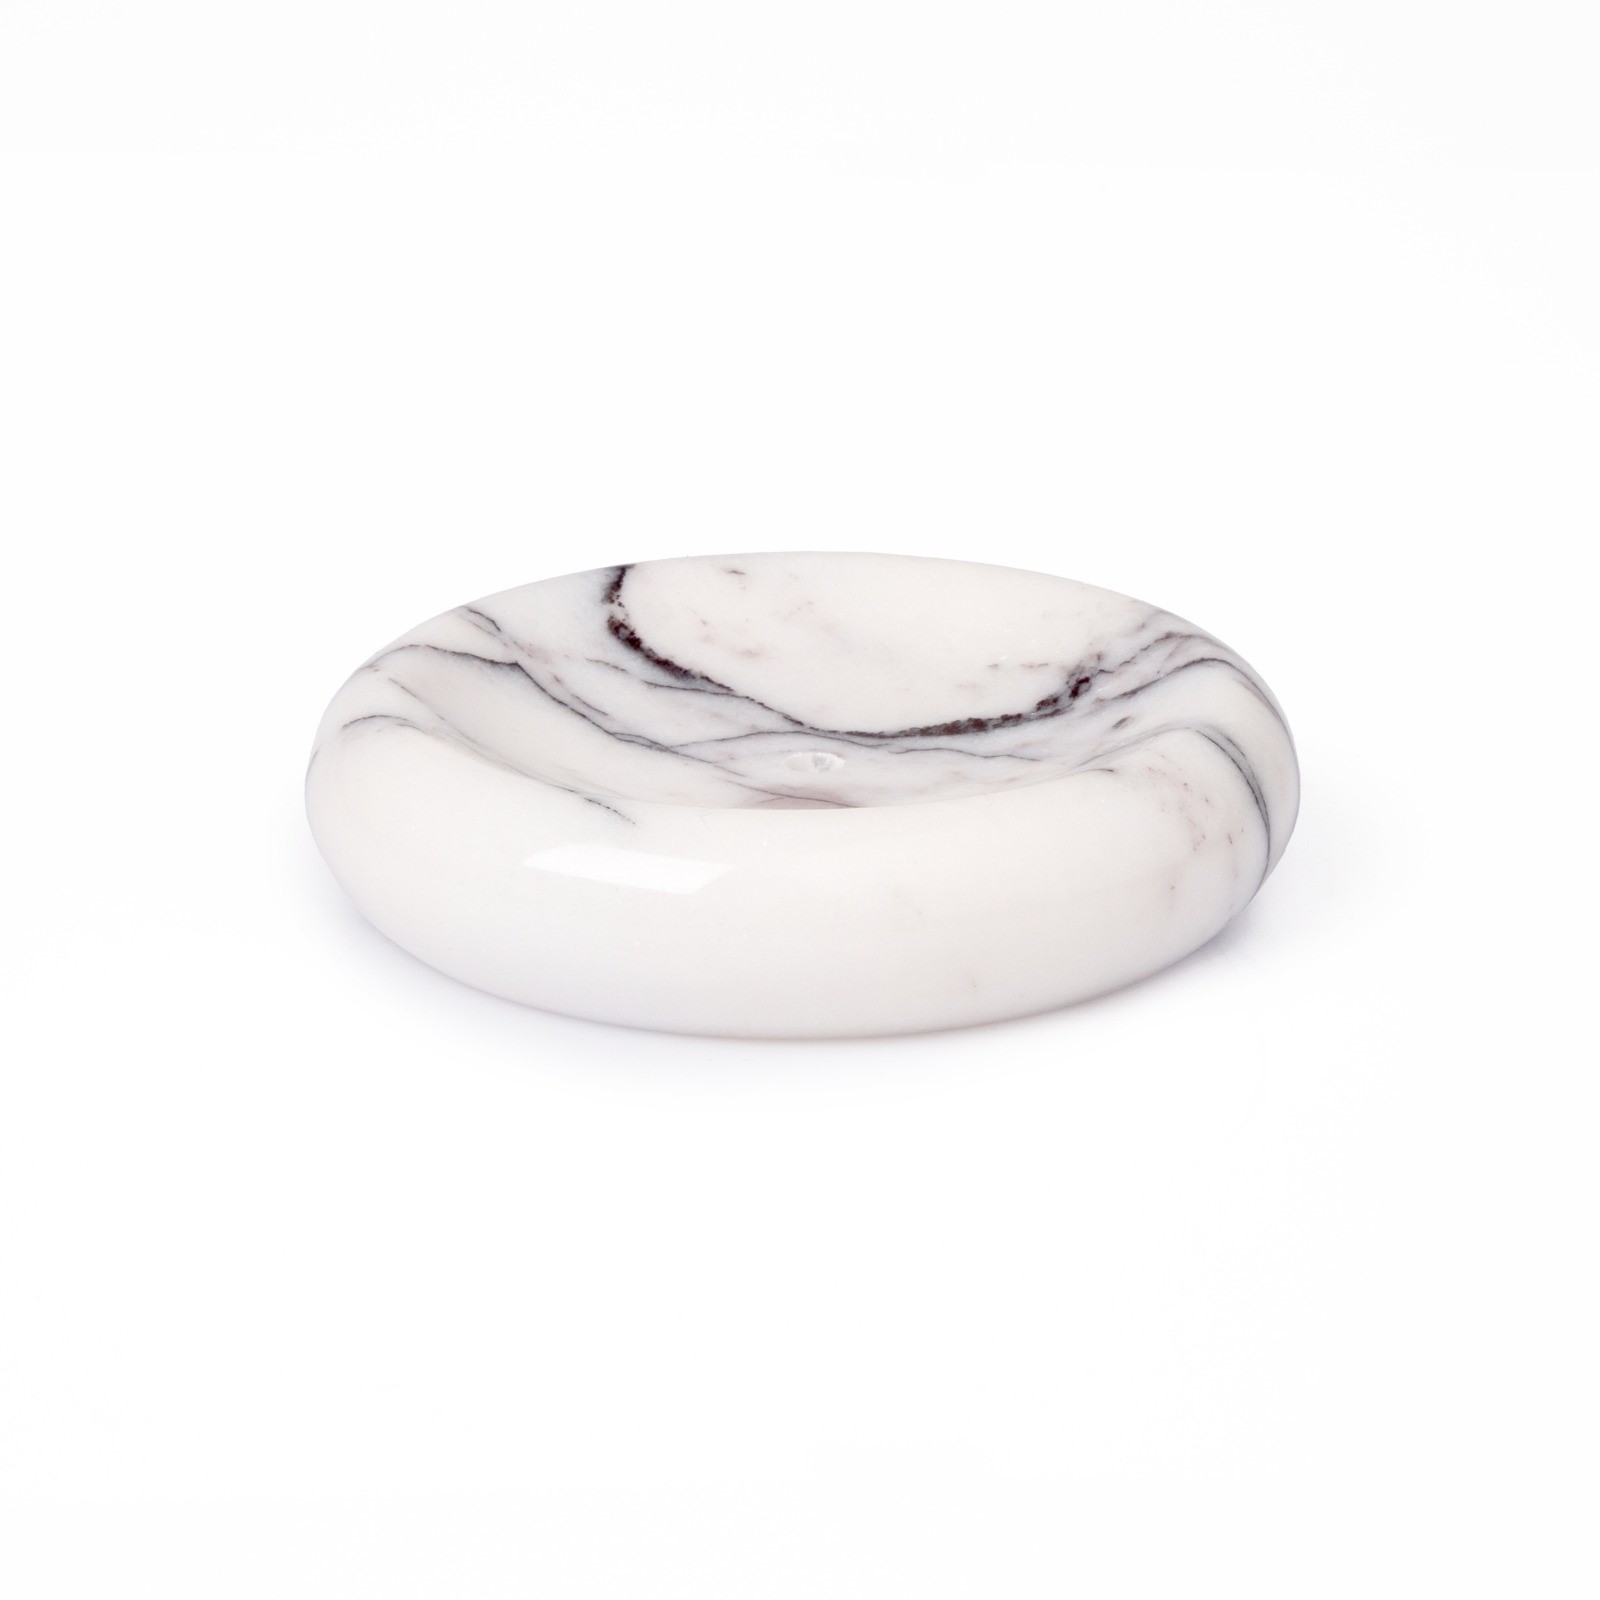 Marble soap dish by Ottoman